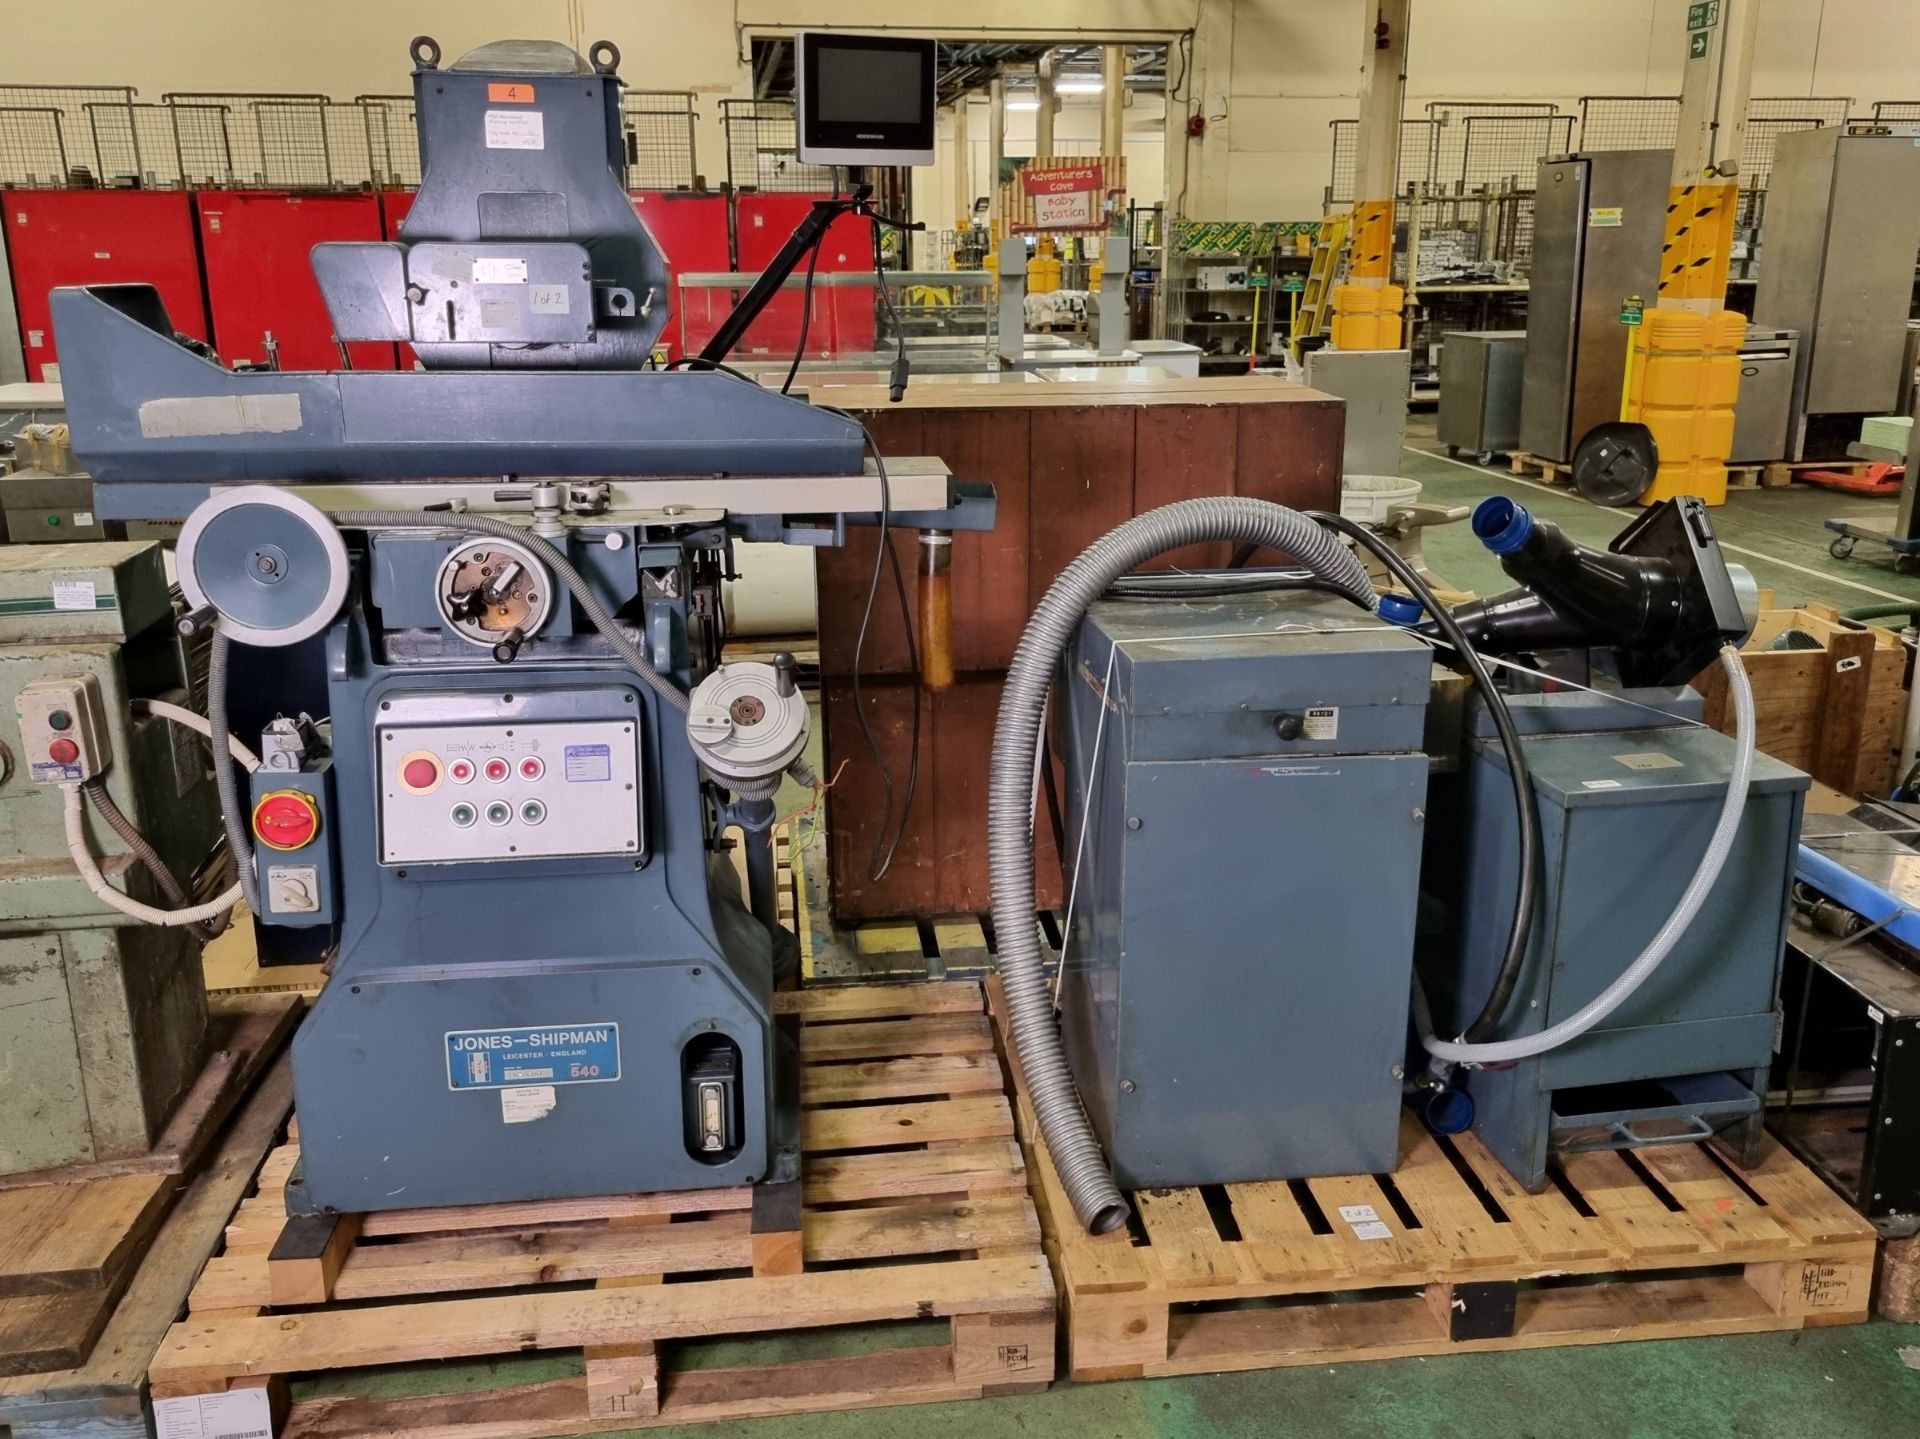 Jones & Shipman Ltd Model 540 surface grinder with dust extractor and coolant tank